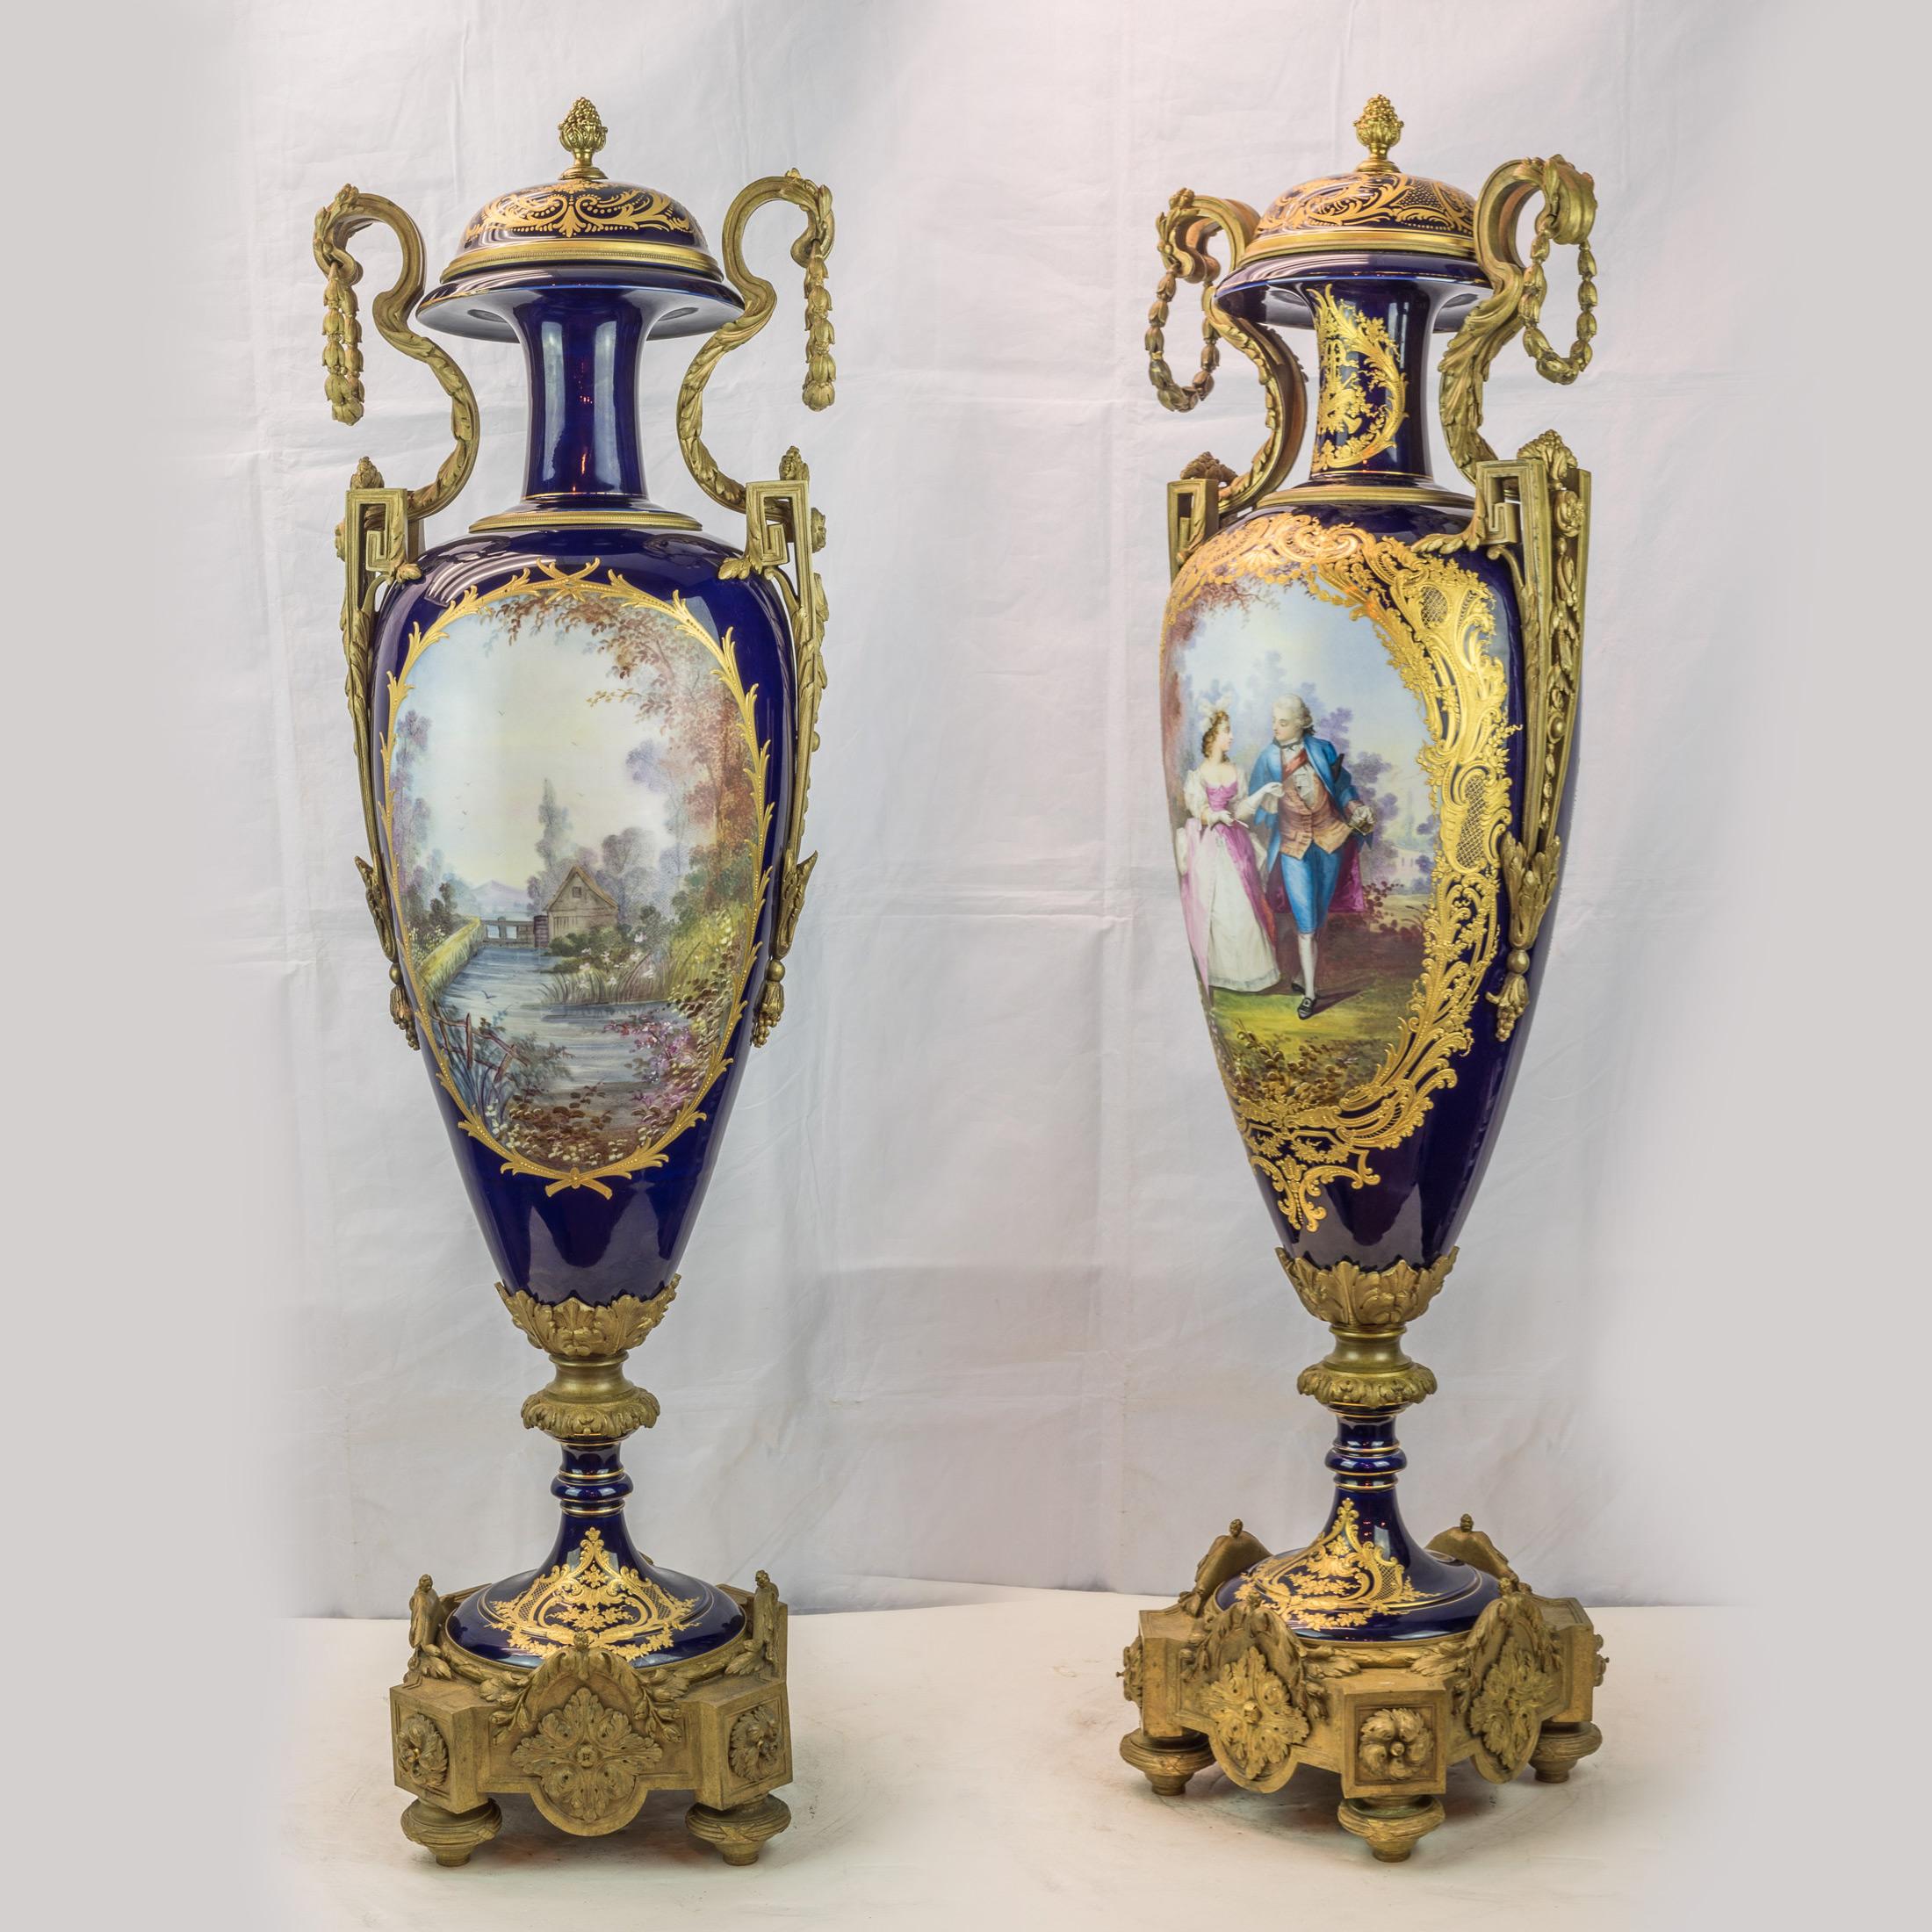 A fine and important monumental pair of Sevres gilt bronze mounted, hand painted with extensive gilt highlights, cobalt blue porcelain vases and cover with lovers and landscapes on octagonal base.

Date: circa 1880
Origin: French
Dimension: 41